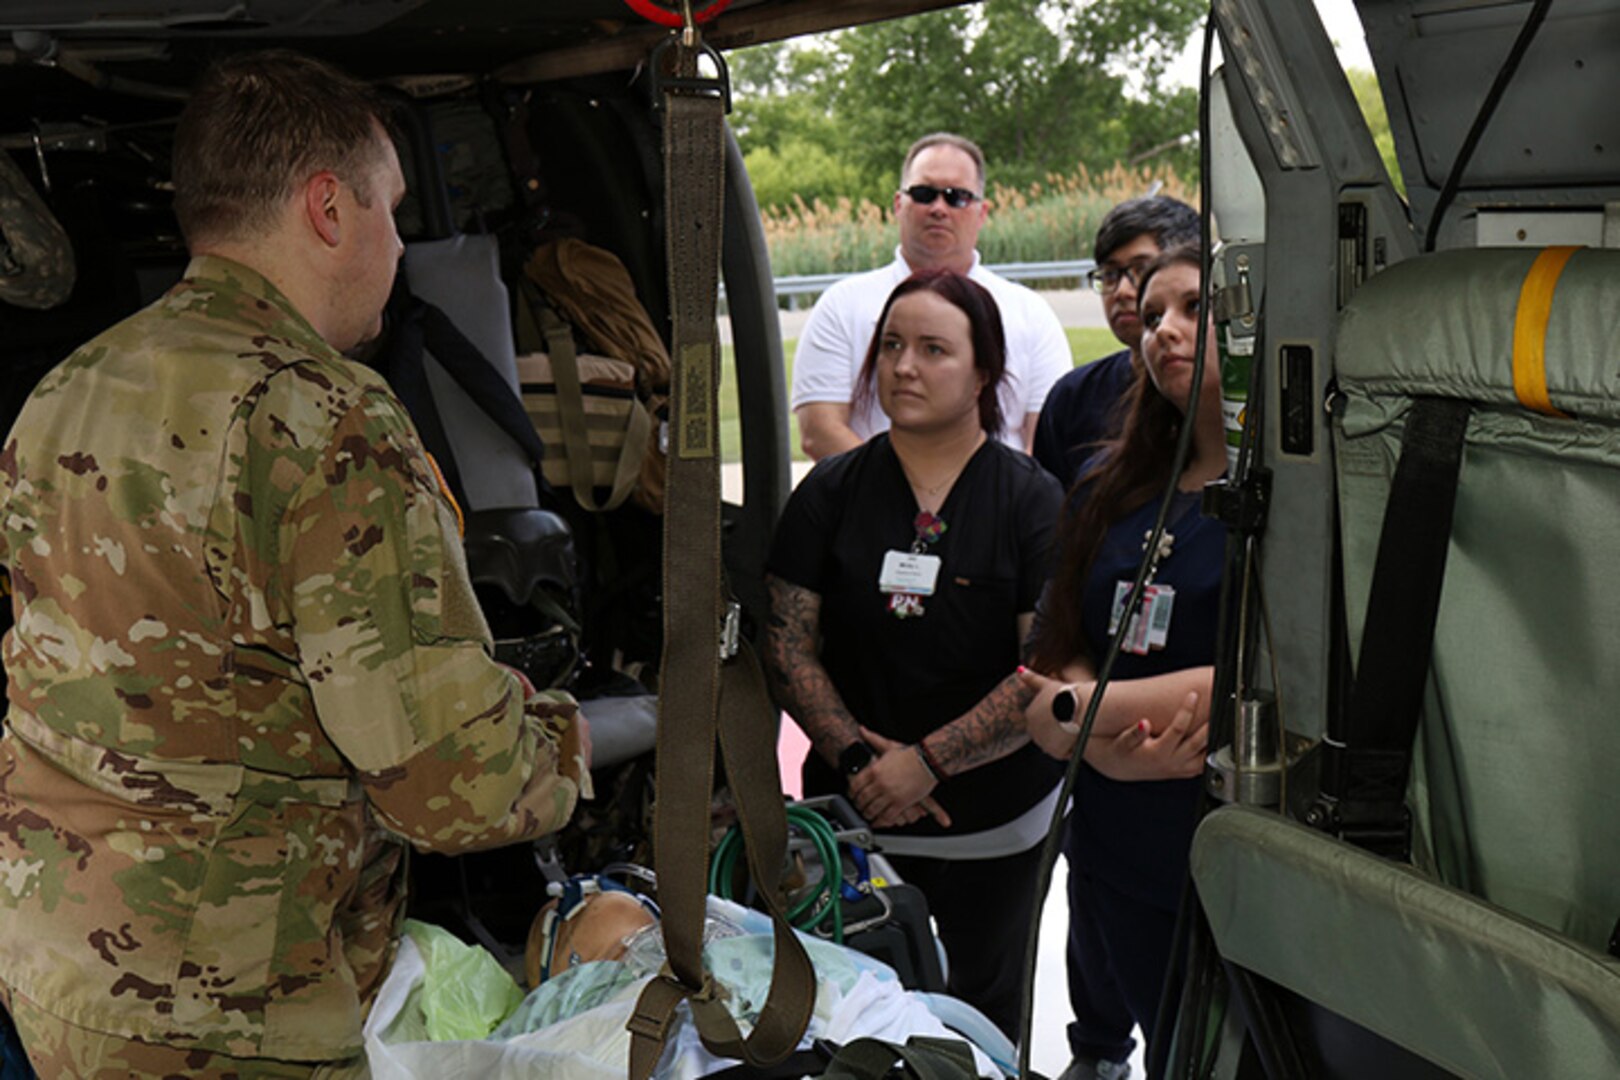 Aurora BayCare Medical Center professionals discuss emergency room procedures with Soldiers from the medevac assets of the Wisconsin Army National Guard’s 1st Battalion, 147th Aviation Regiment during a June 22 event.